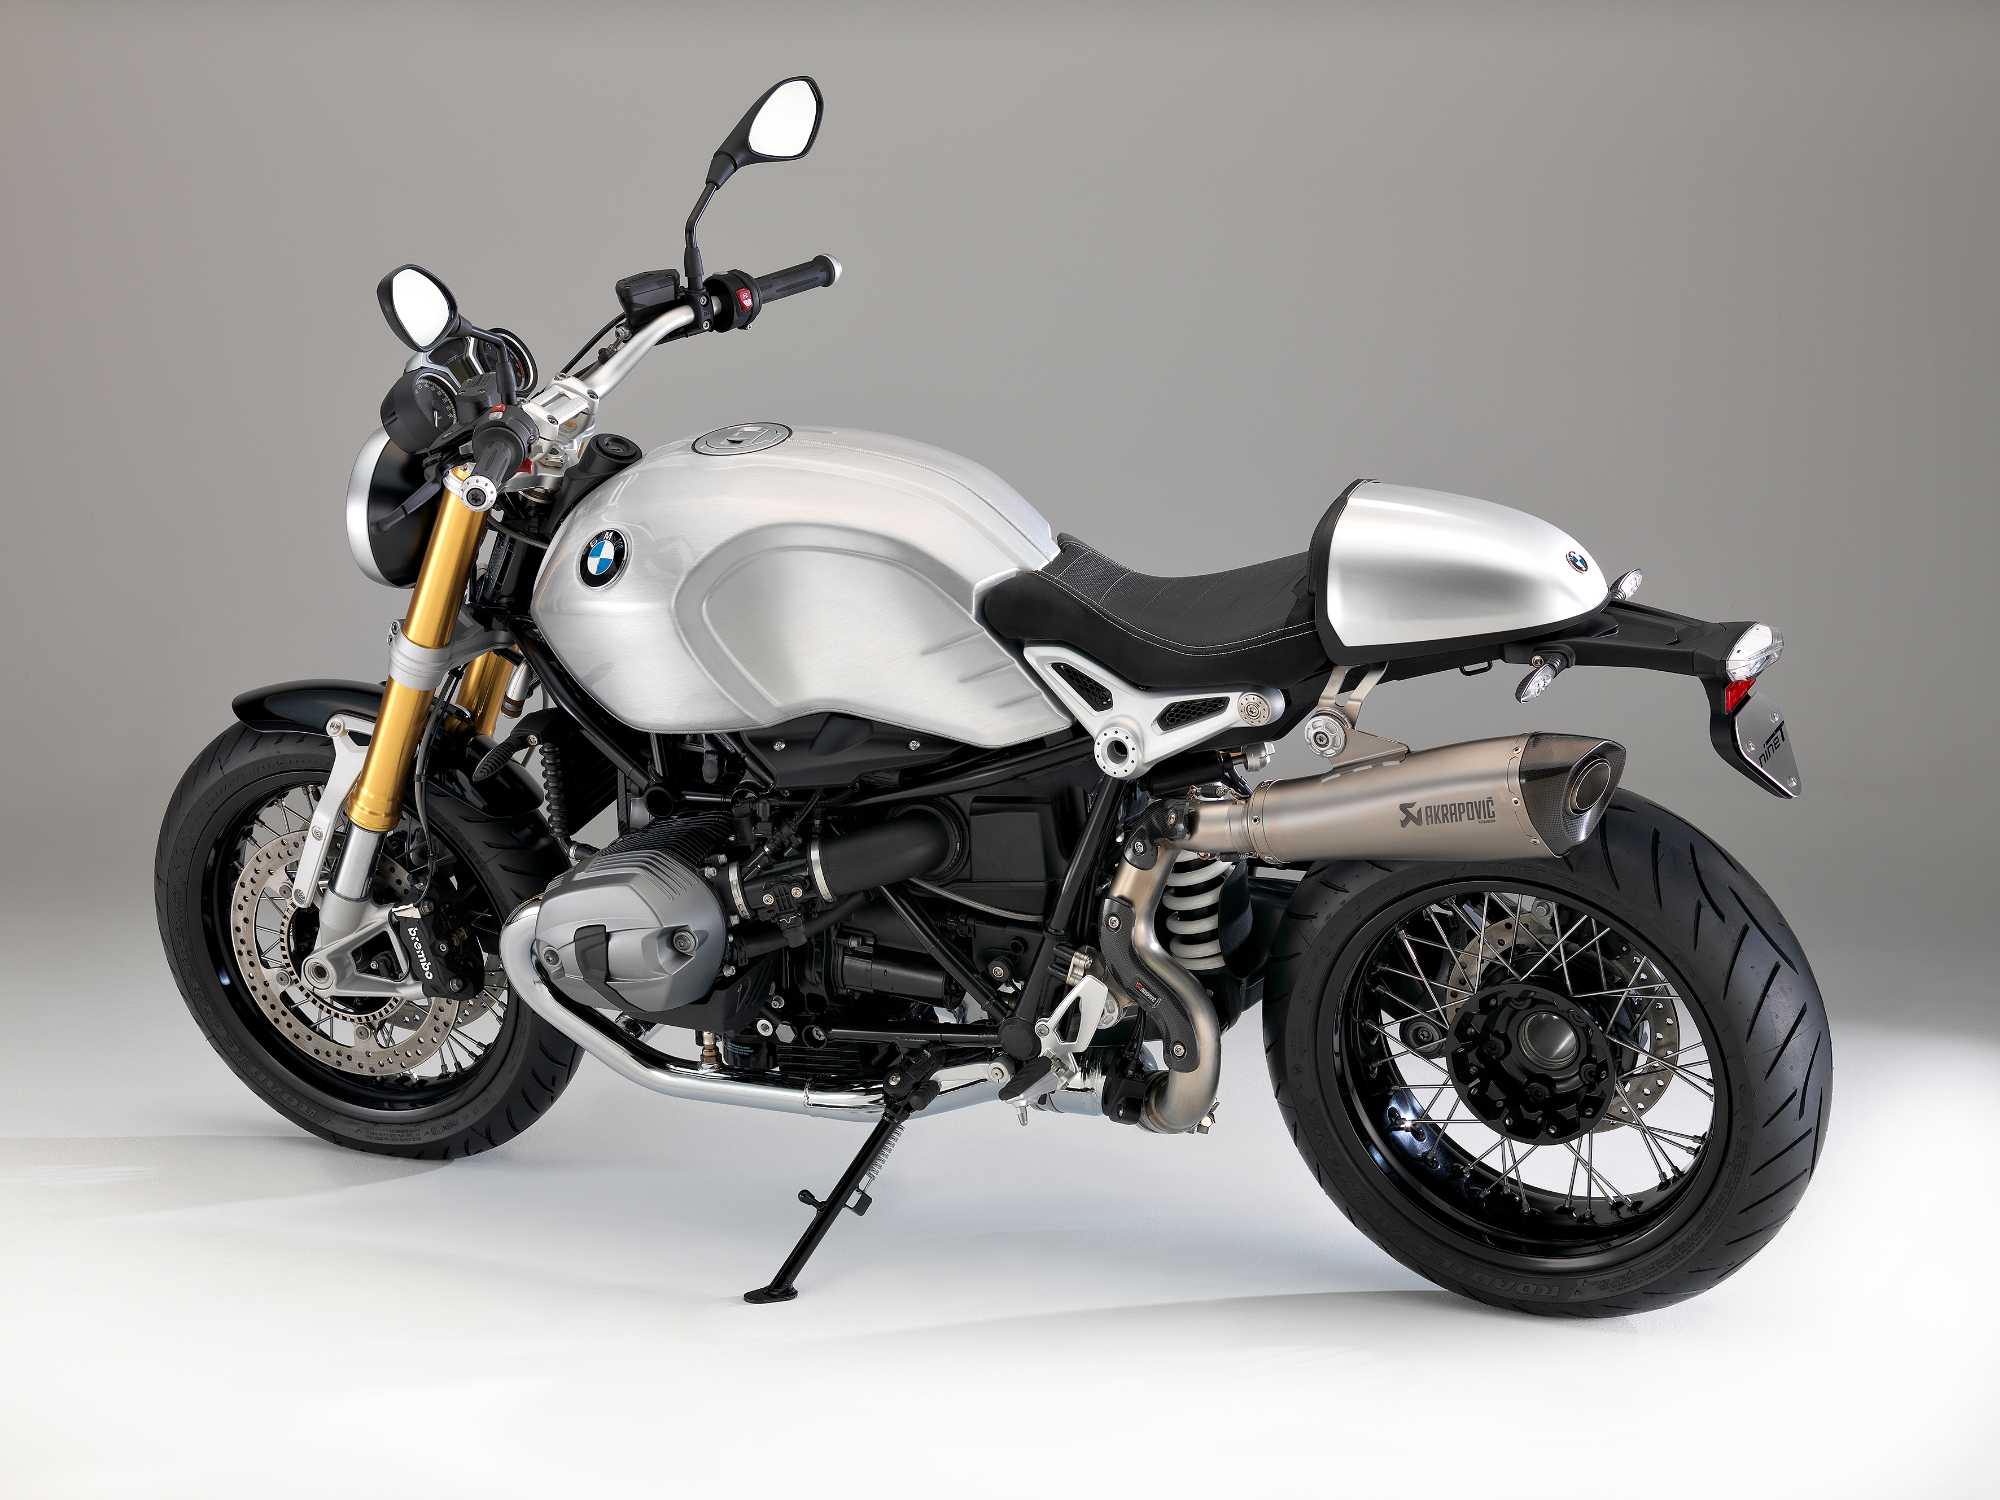 Bmw Motorrad Expands Customizing Range For The R Ninet Hand Brushed Aluminium Fuel Tanks Give Motorcycle Hand Crafted Character